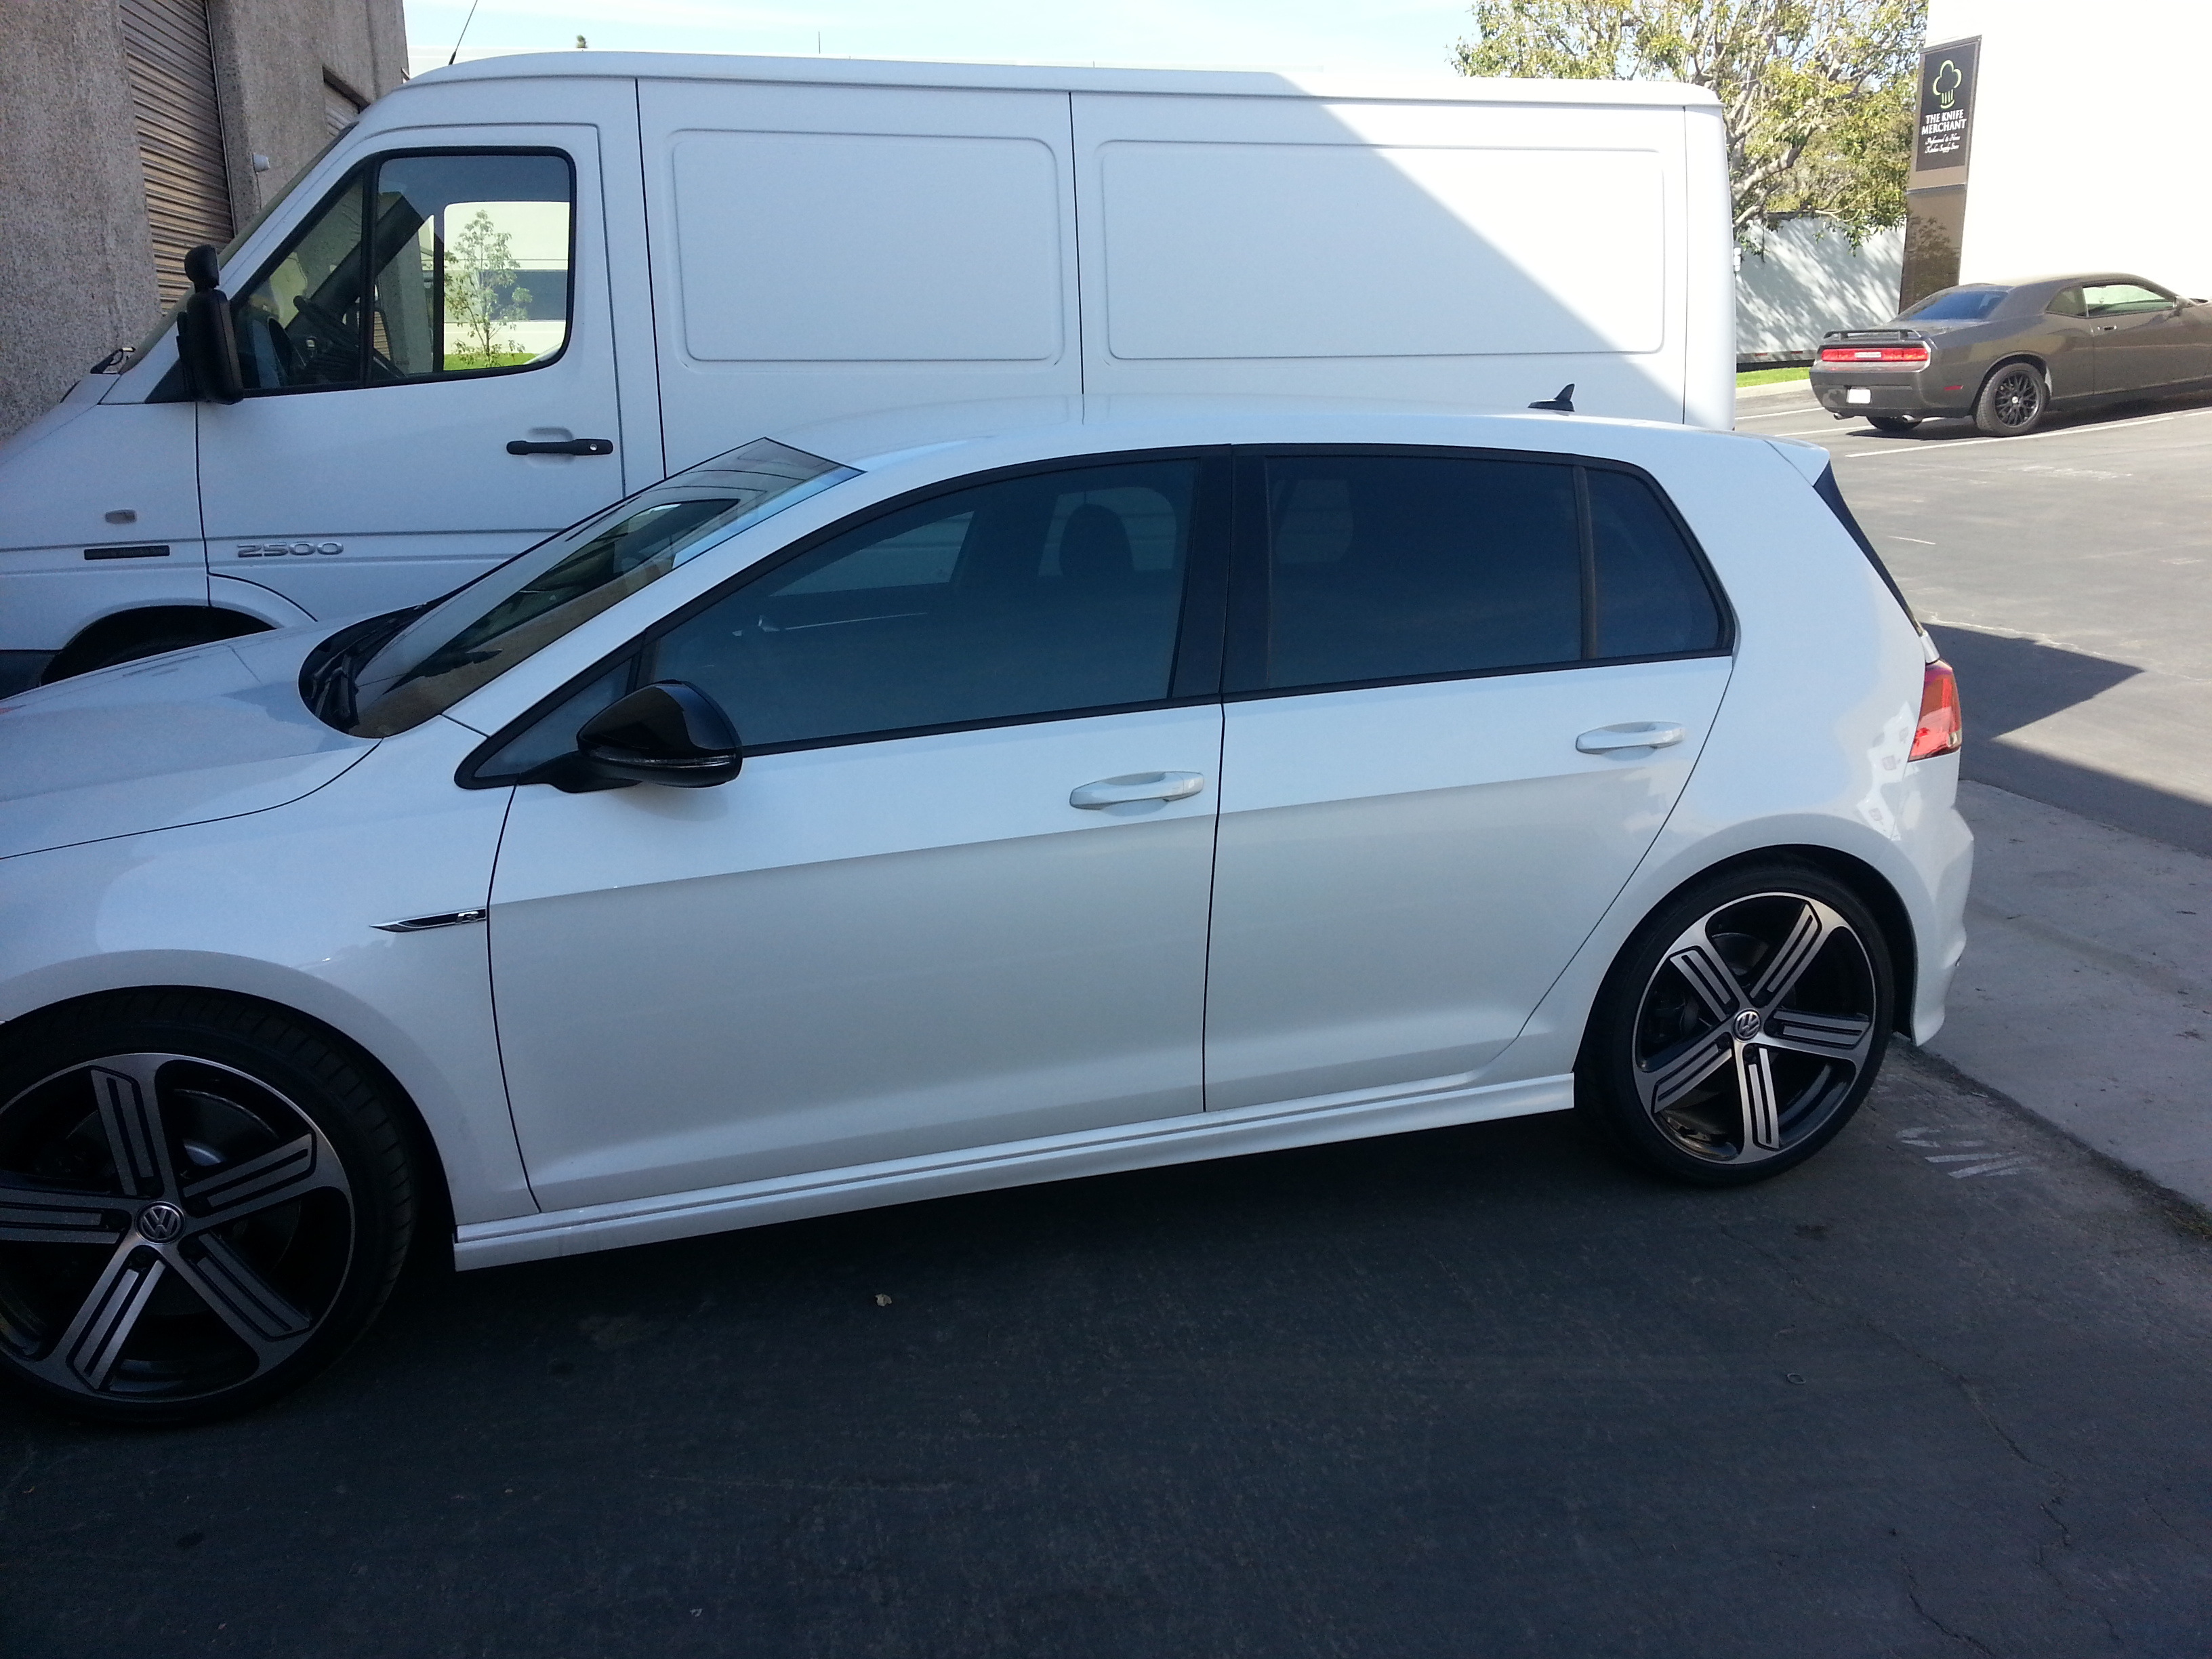 2018 Vw Golf R Lease Ask The Hackrs Leasehackr Forum